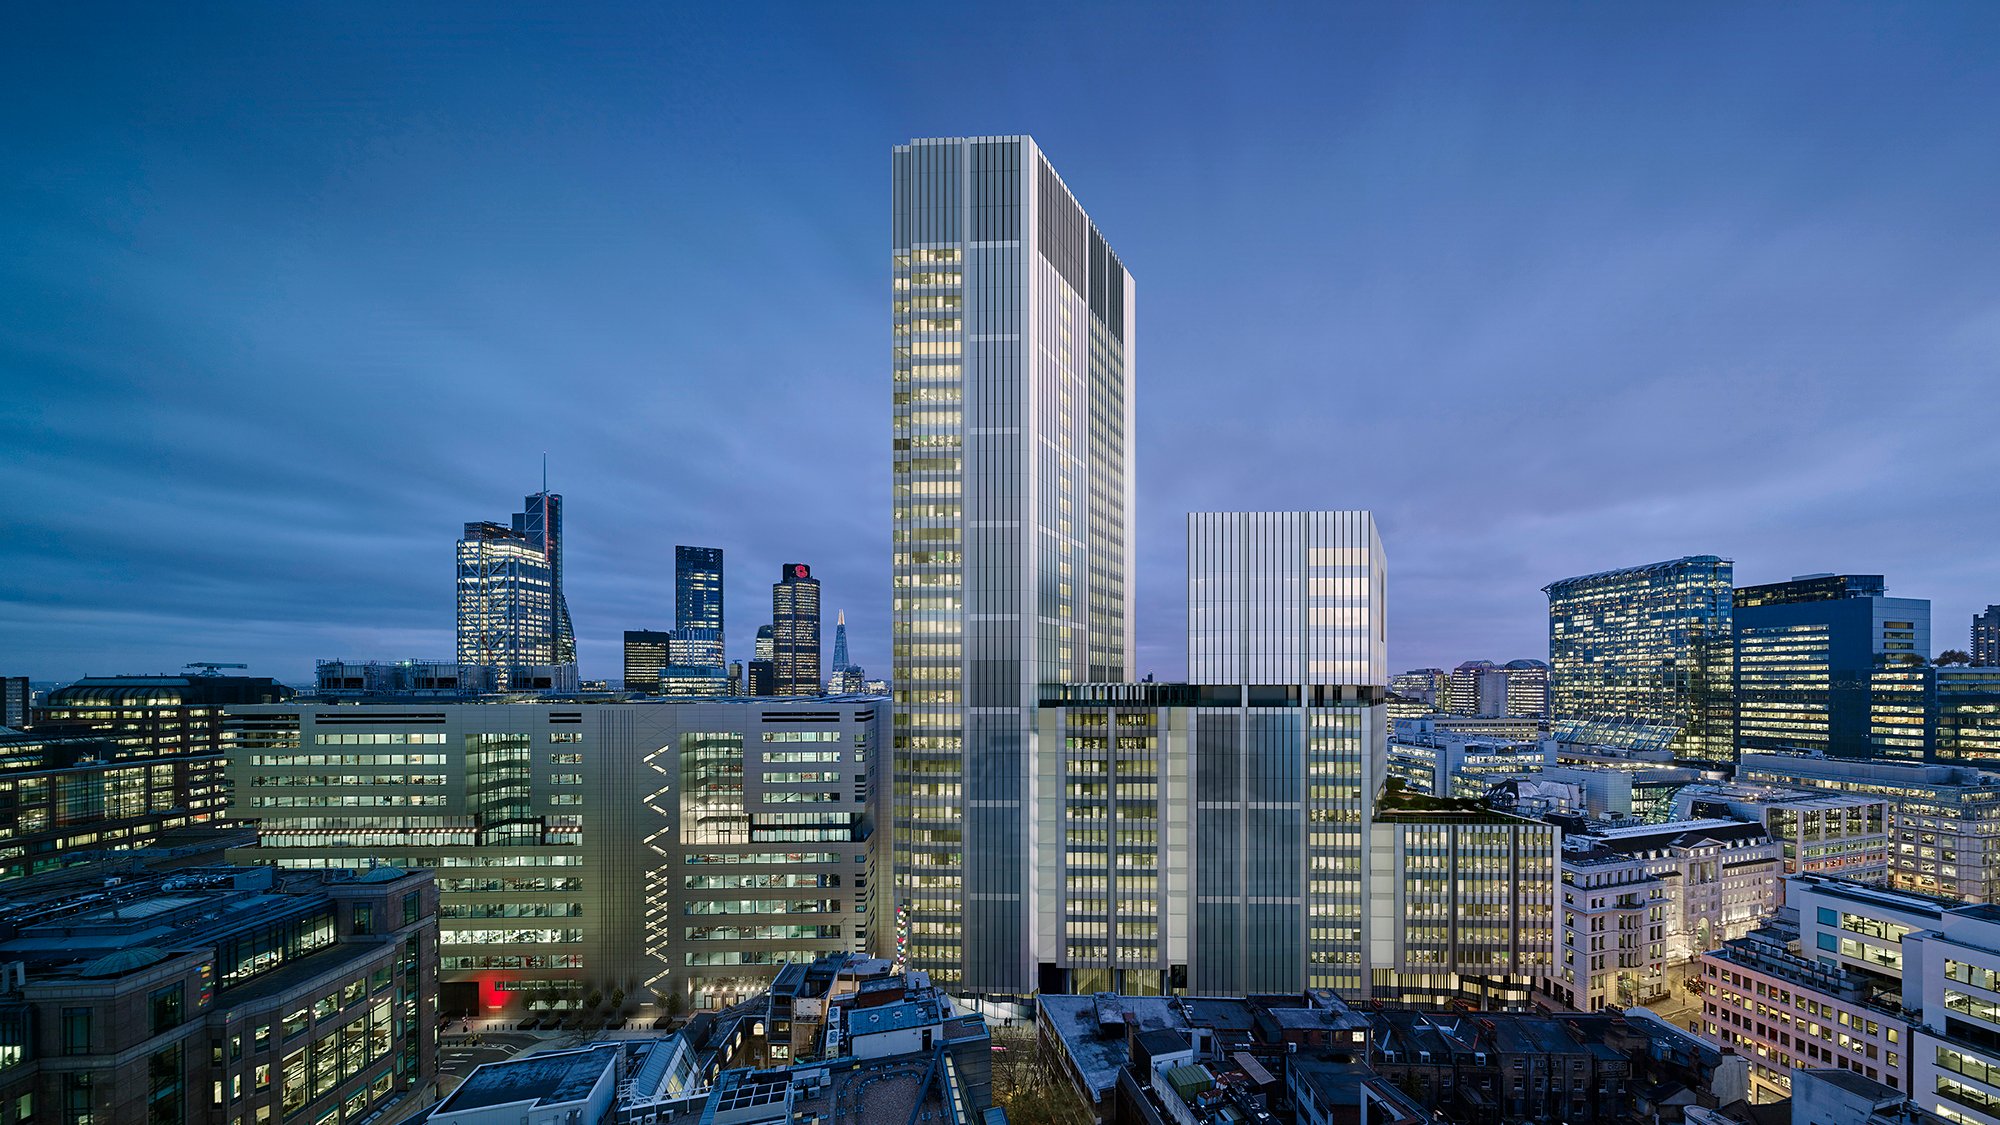 The new 32 Storey tower shown in the context of the city, visualisation. © Hays Davidson